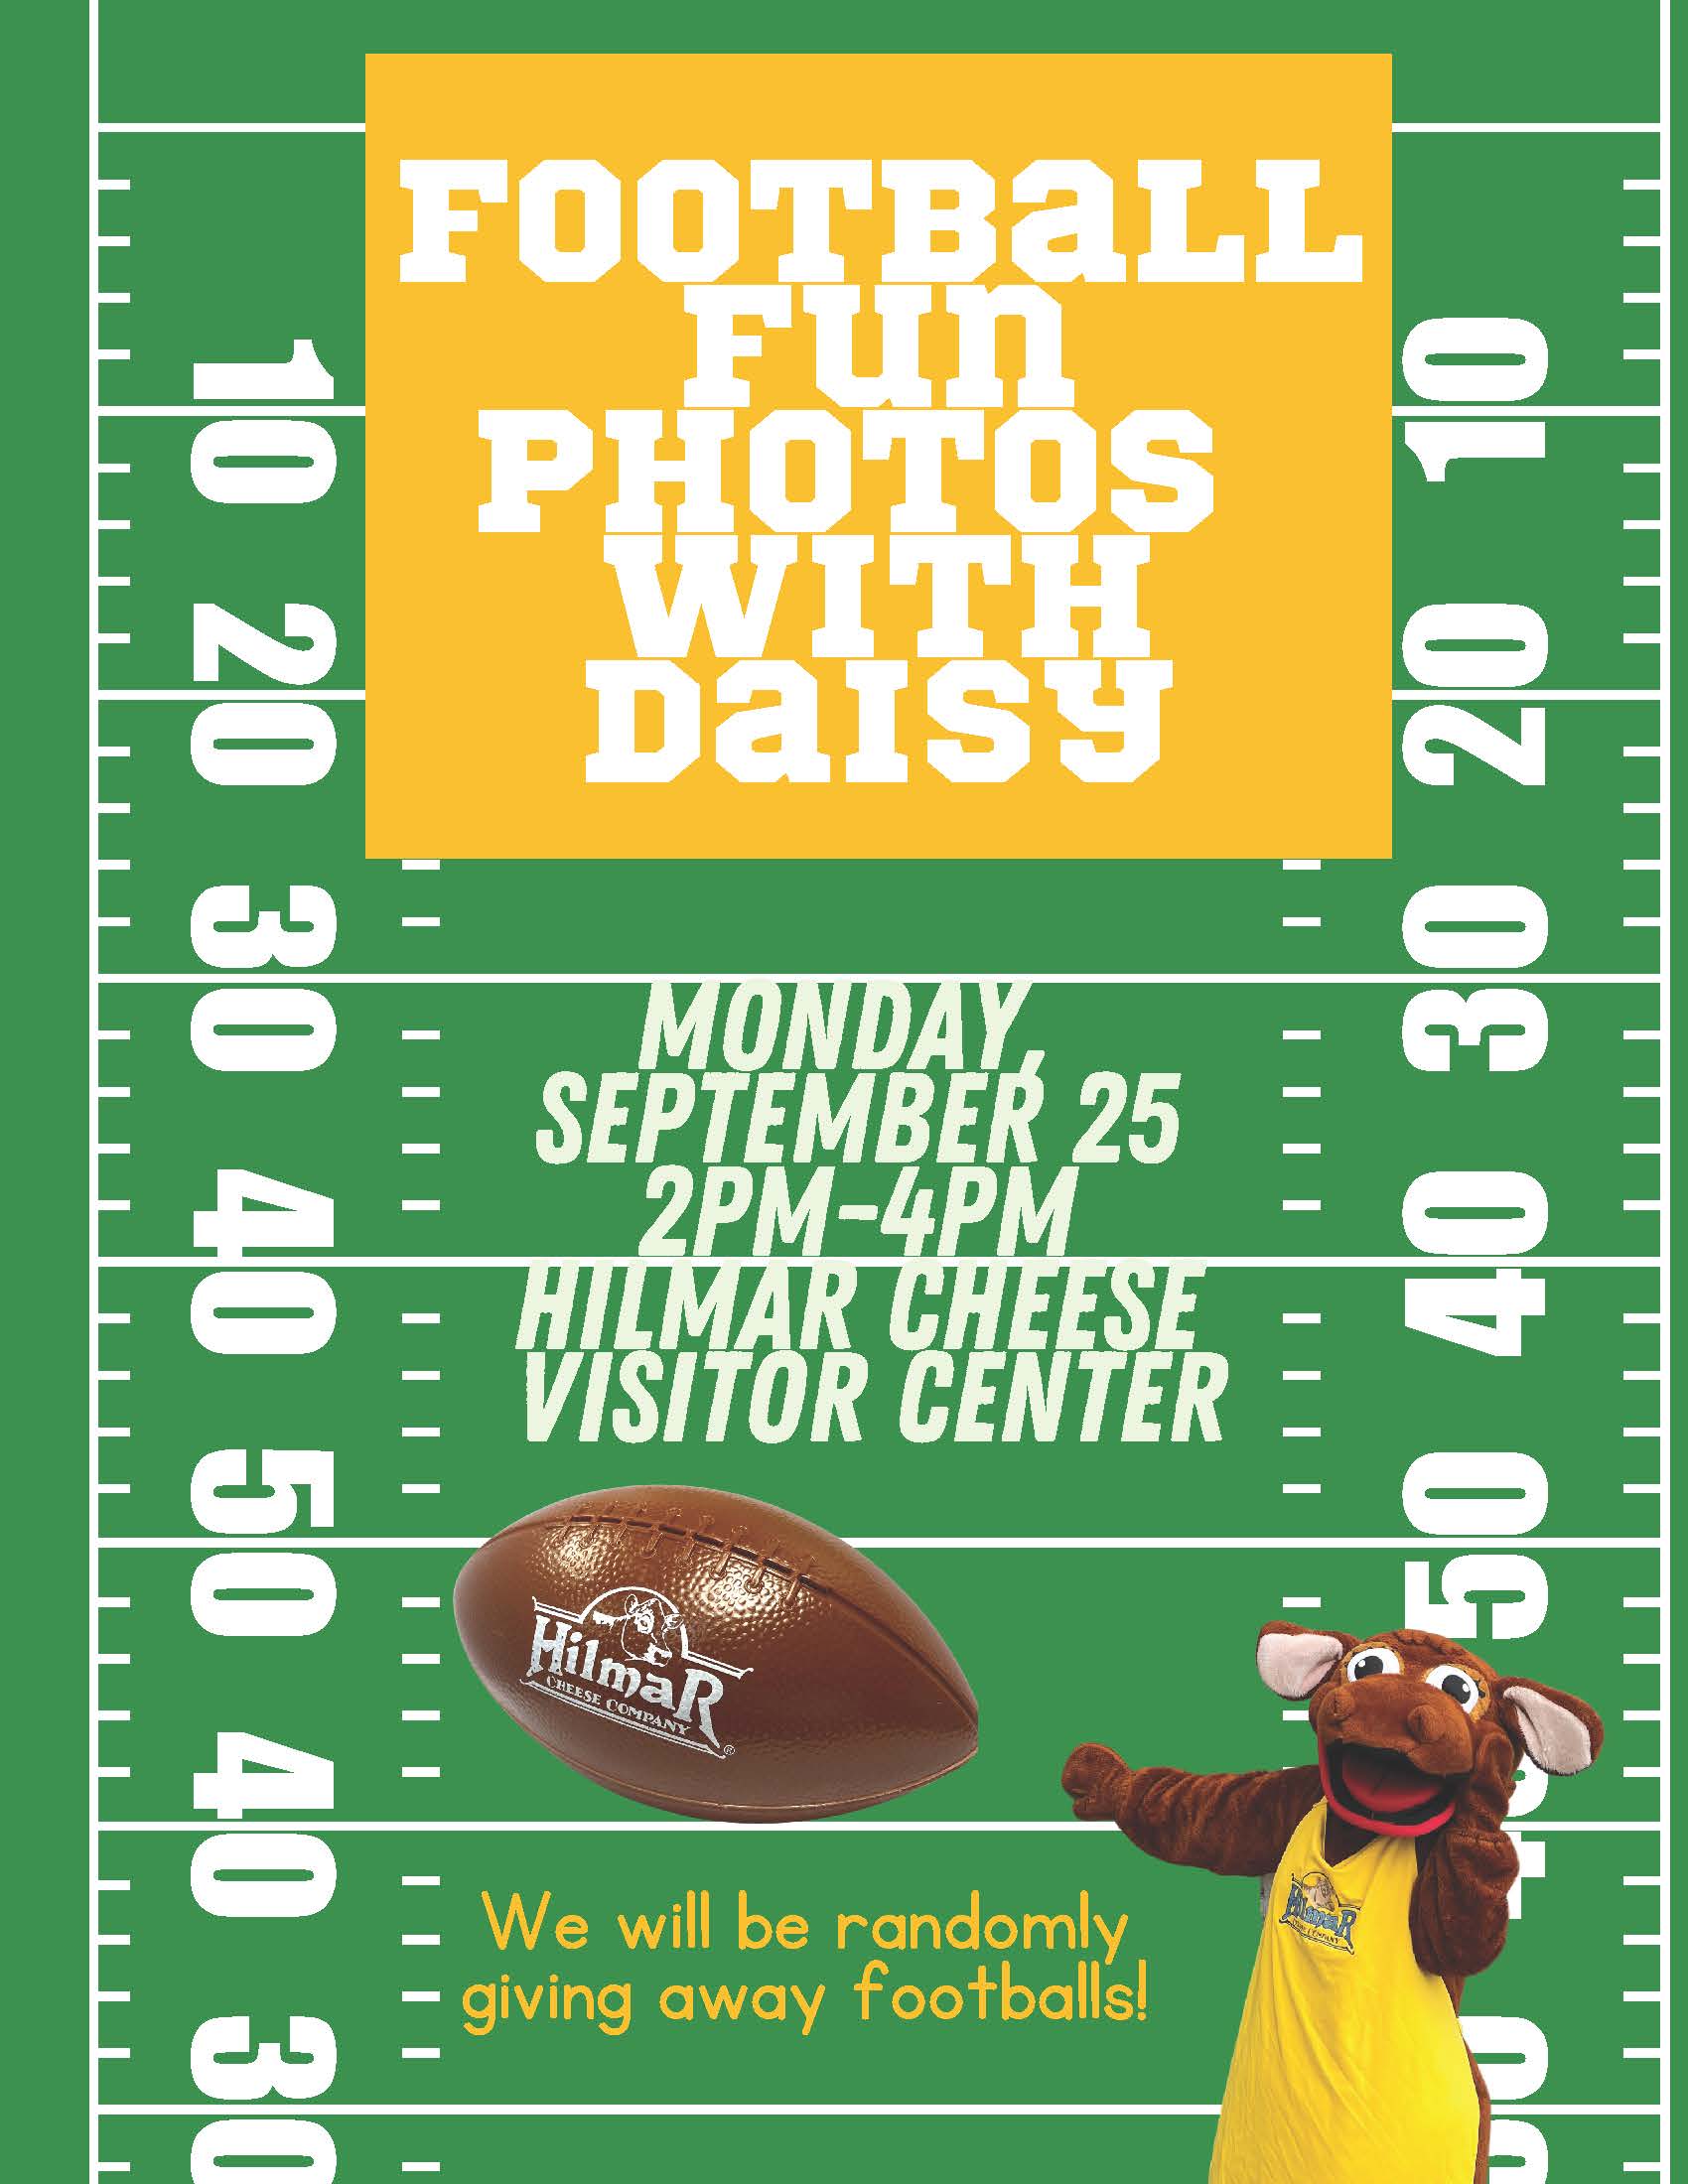 flyer with Daisy spokescow and football to promote Sept. 25